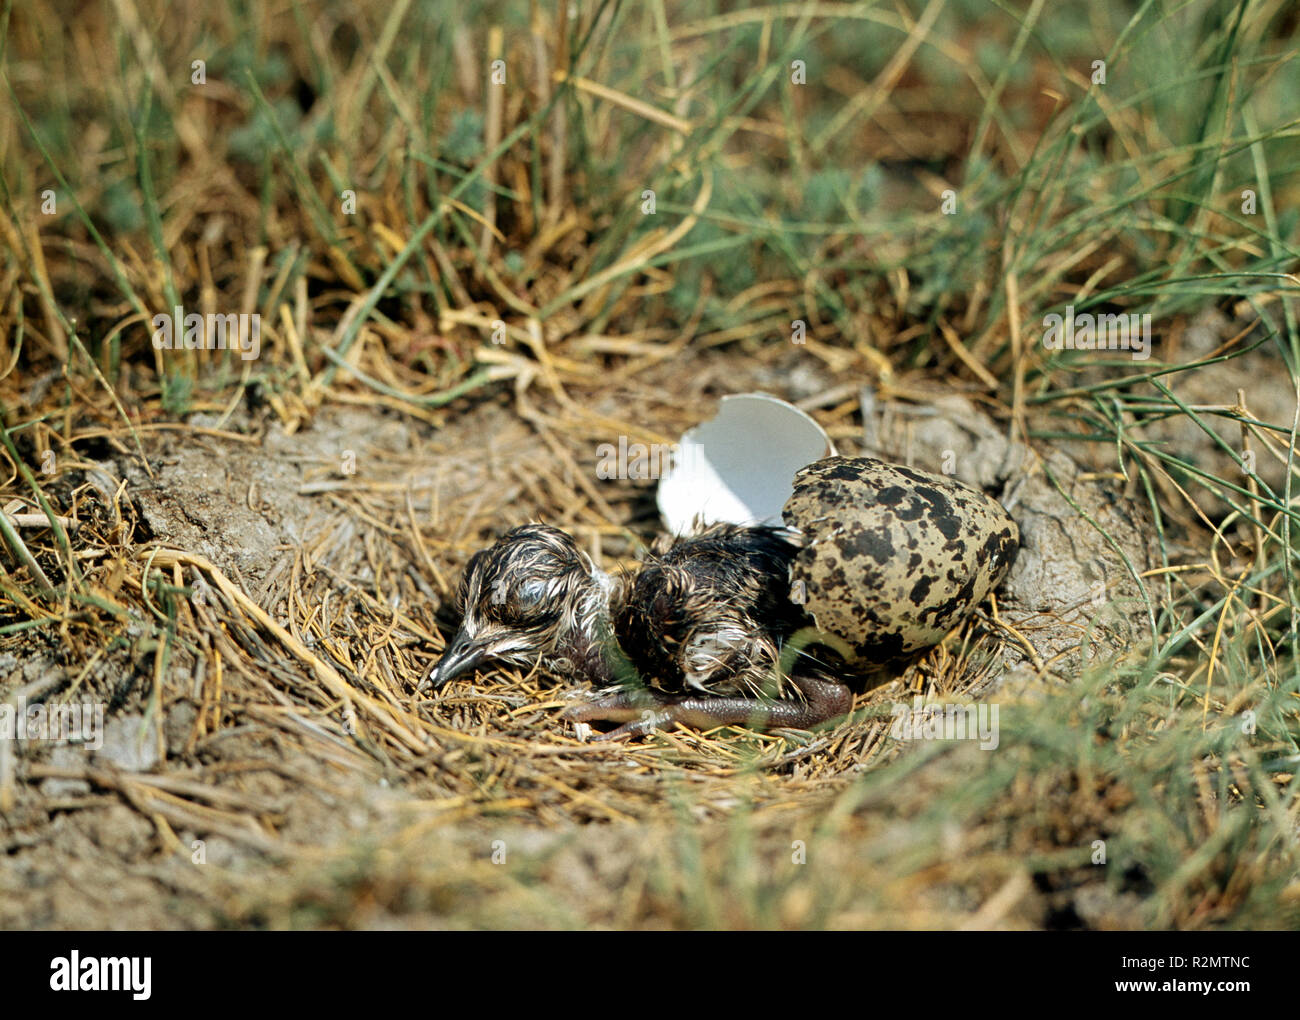 Freshly hatched fledgling in lapwing nest with egg shell Stock Photo